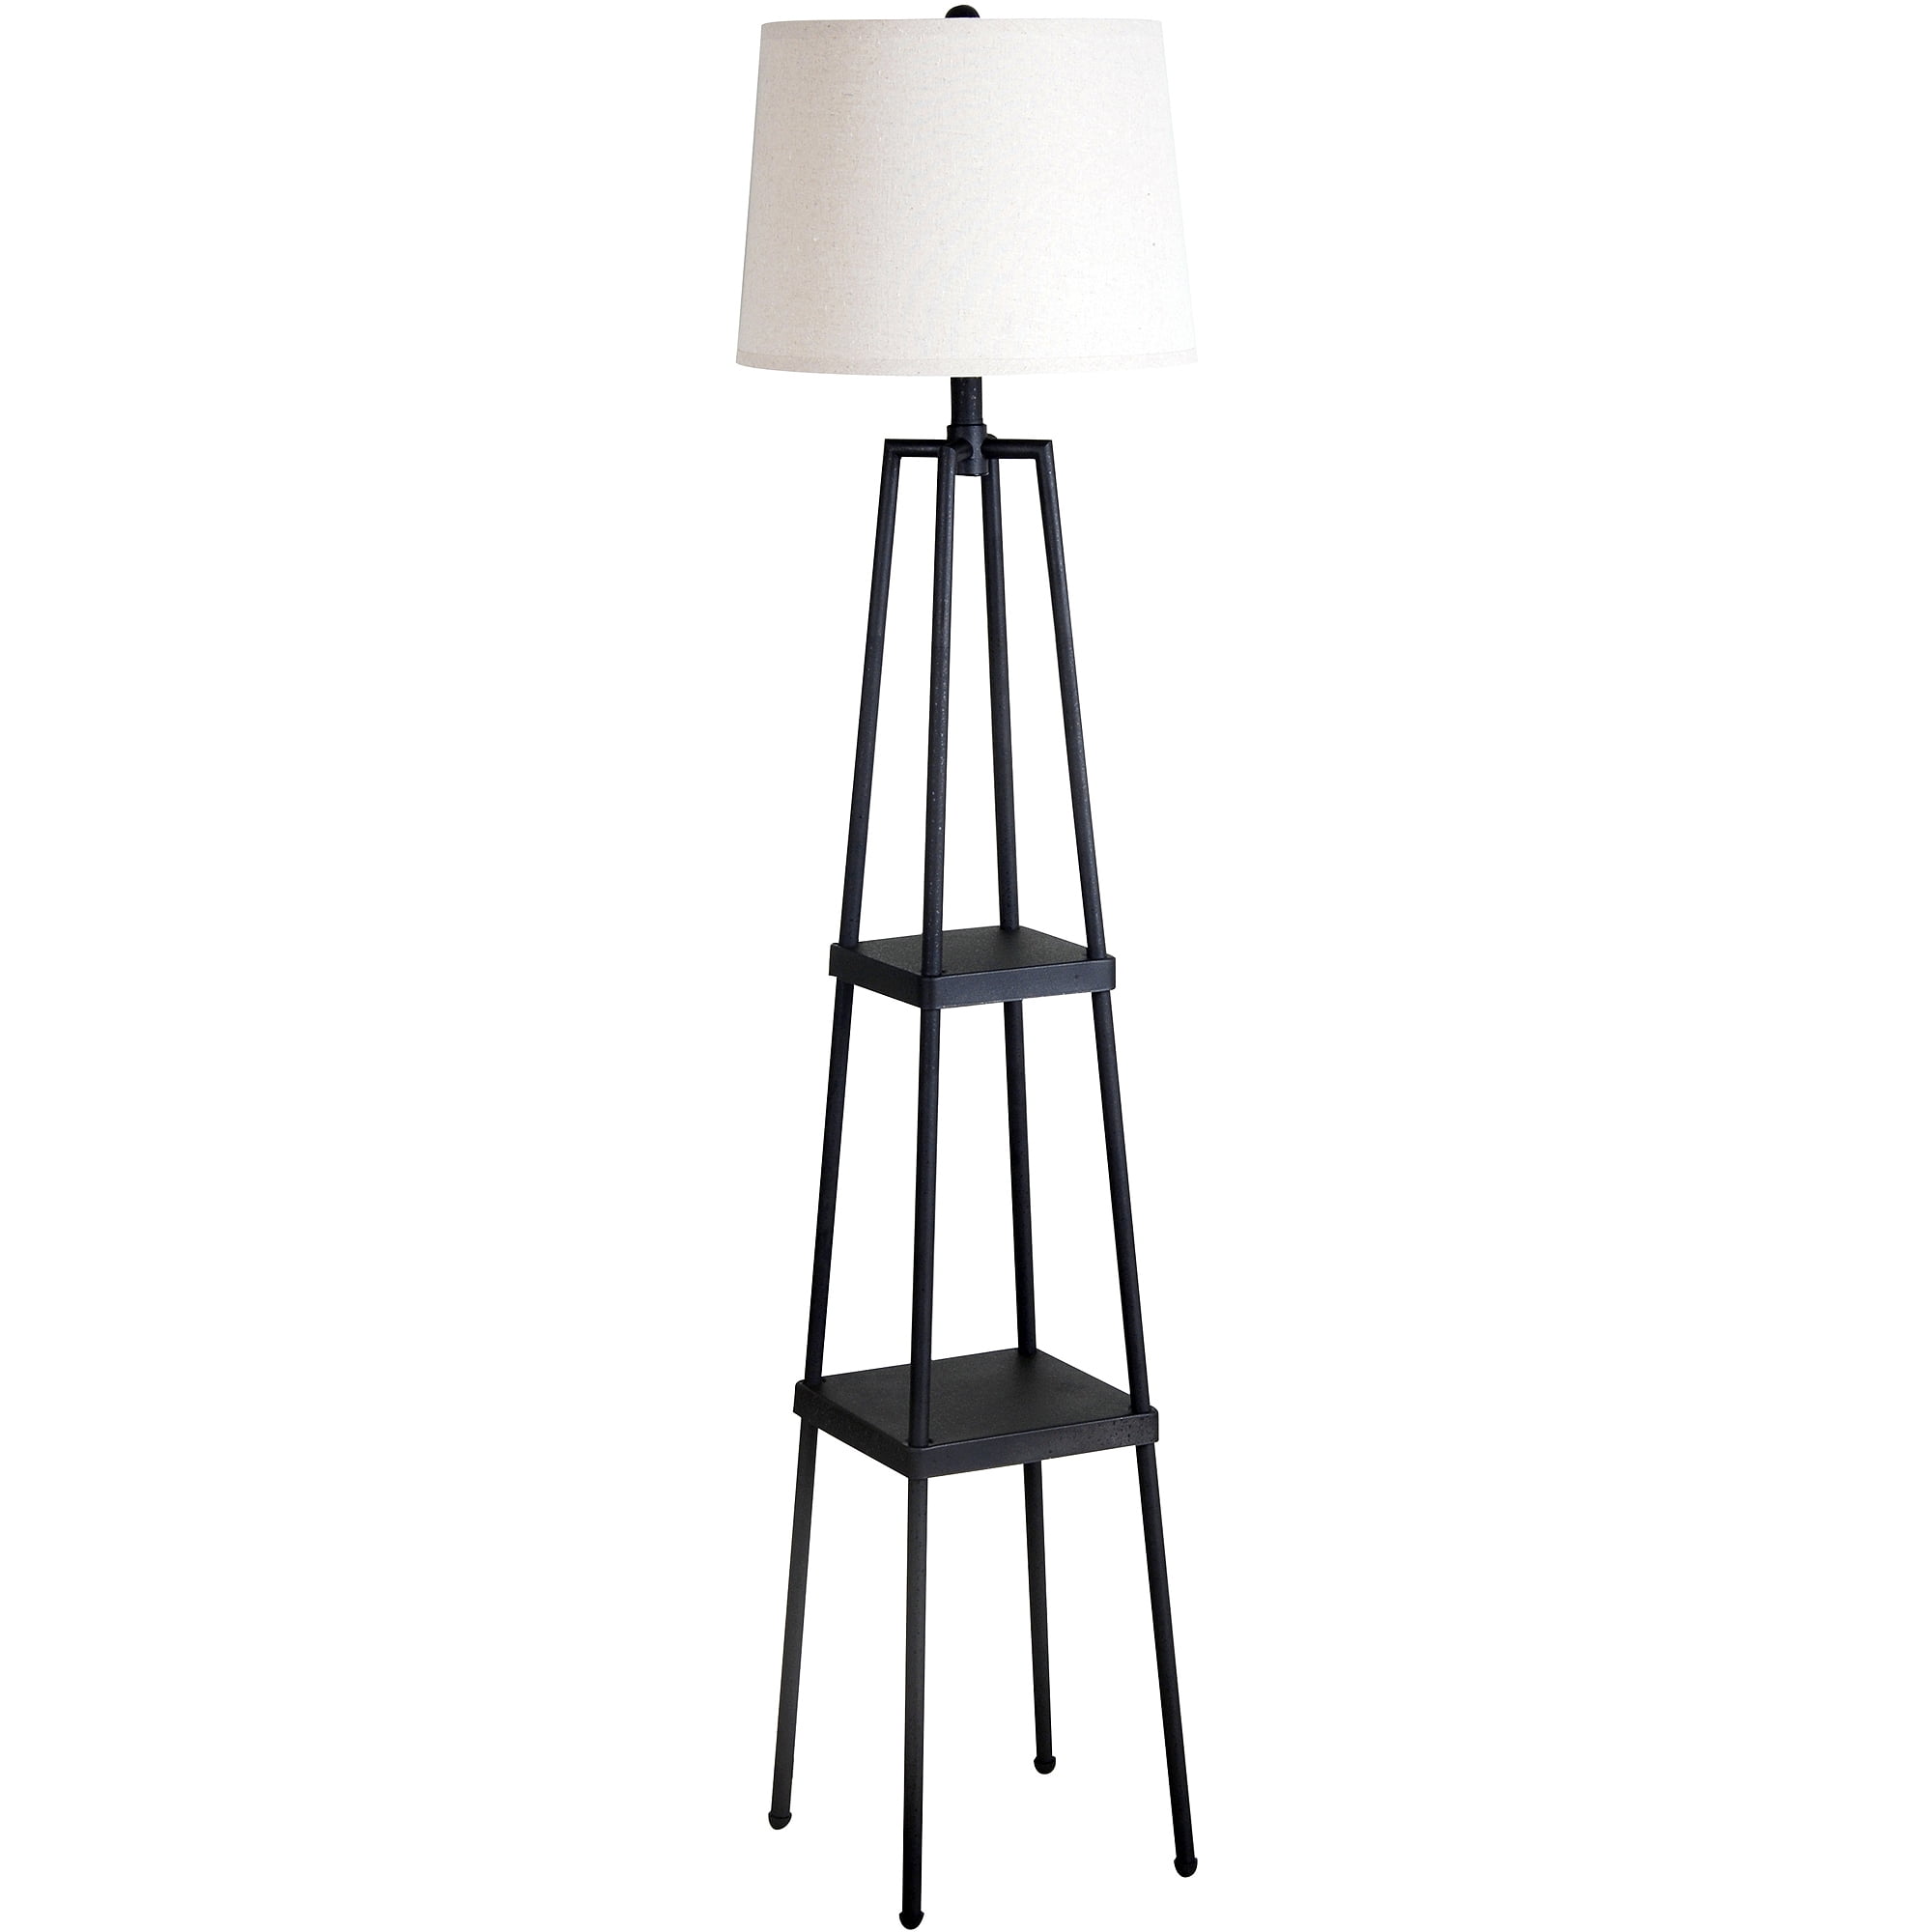 Mainstays Black Shelf Floor Lamp with White Shade On/Off 